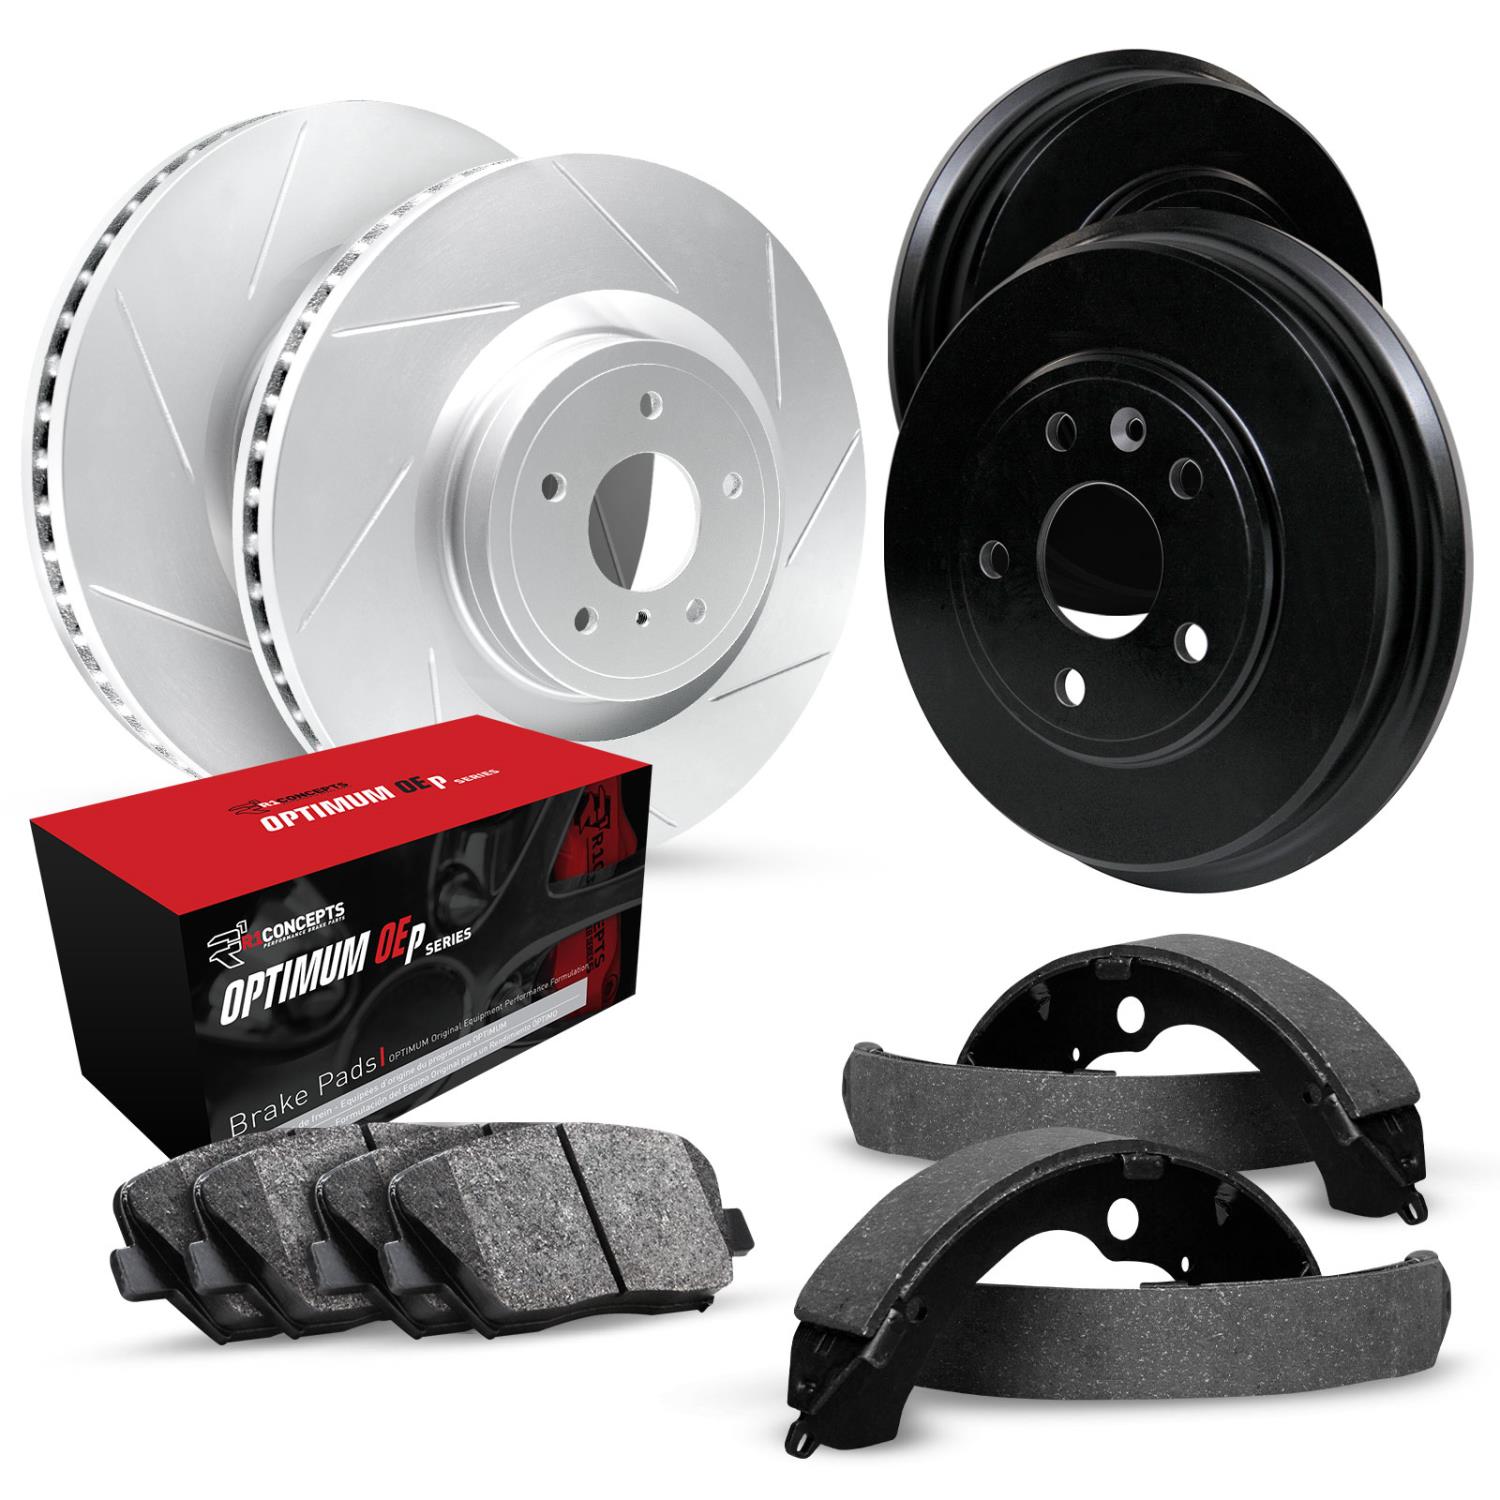 GEO-Carbon Slotted Brake Rotor & Drum Set w/Optimum OE Pads & Shoes, 1990-1995 GM, Position: Front & Rear